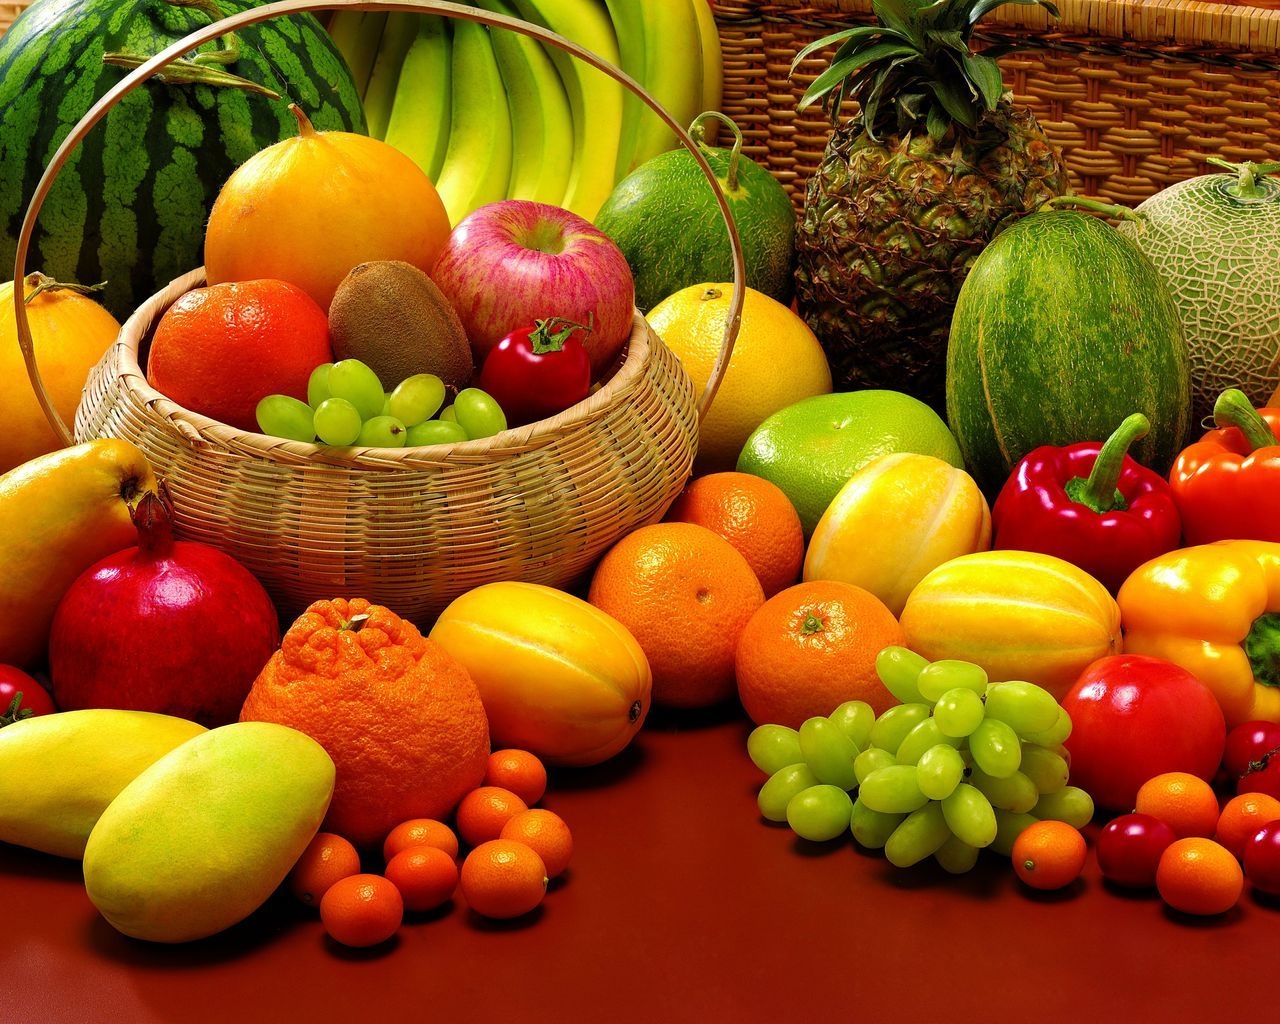 Fruits and Veggies for 1280 x 1024 resolution